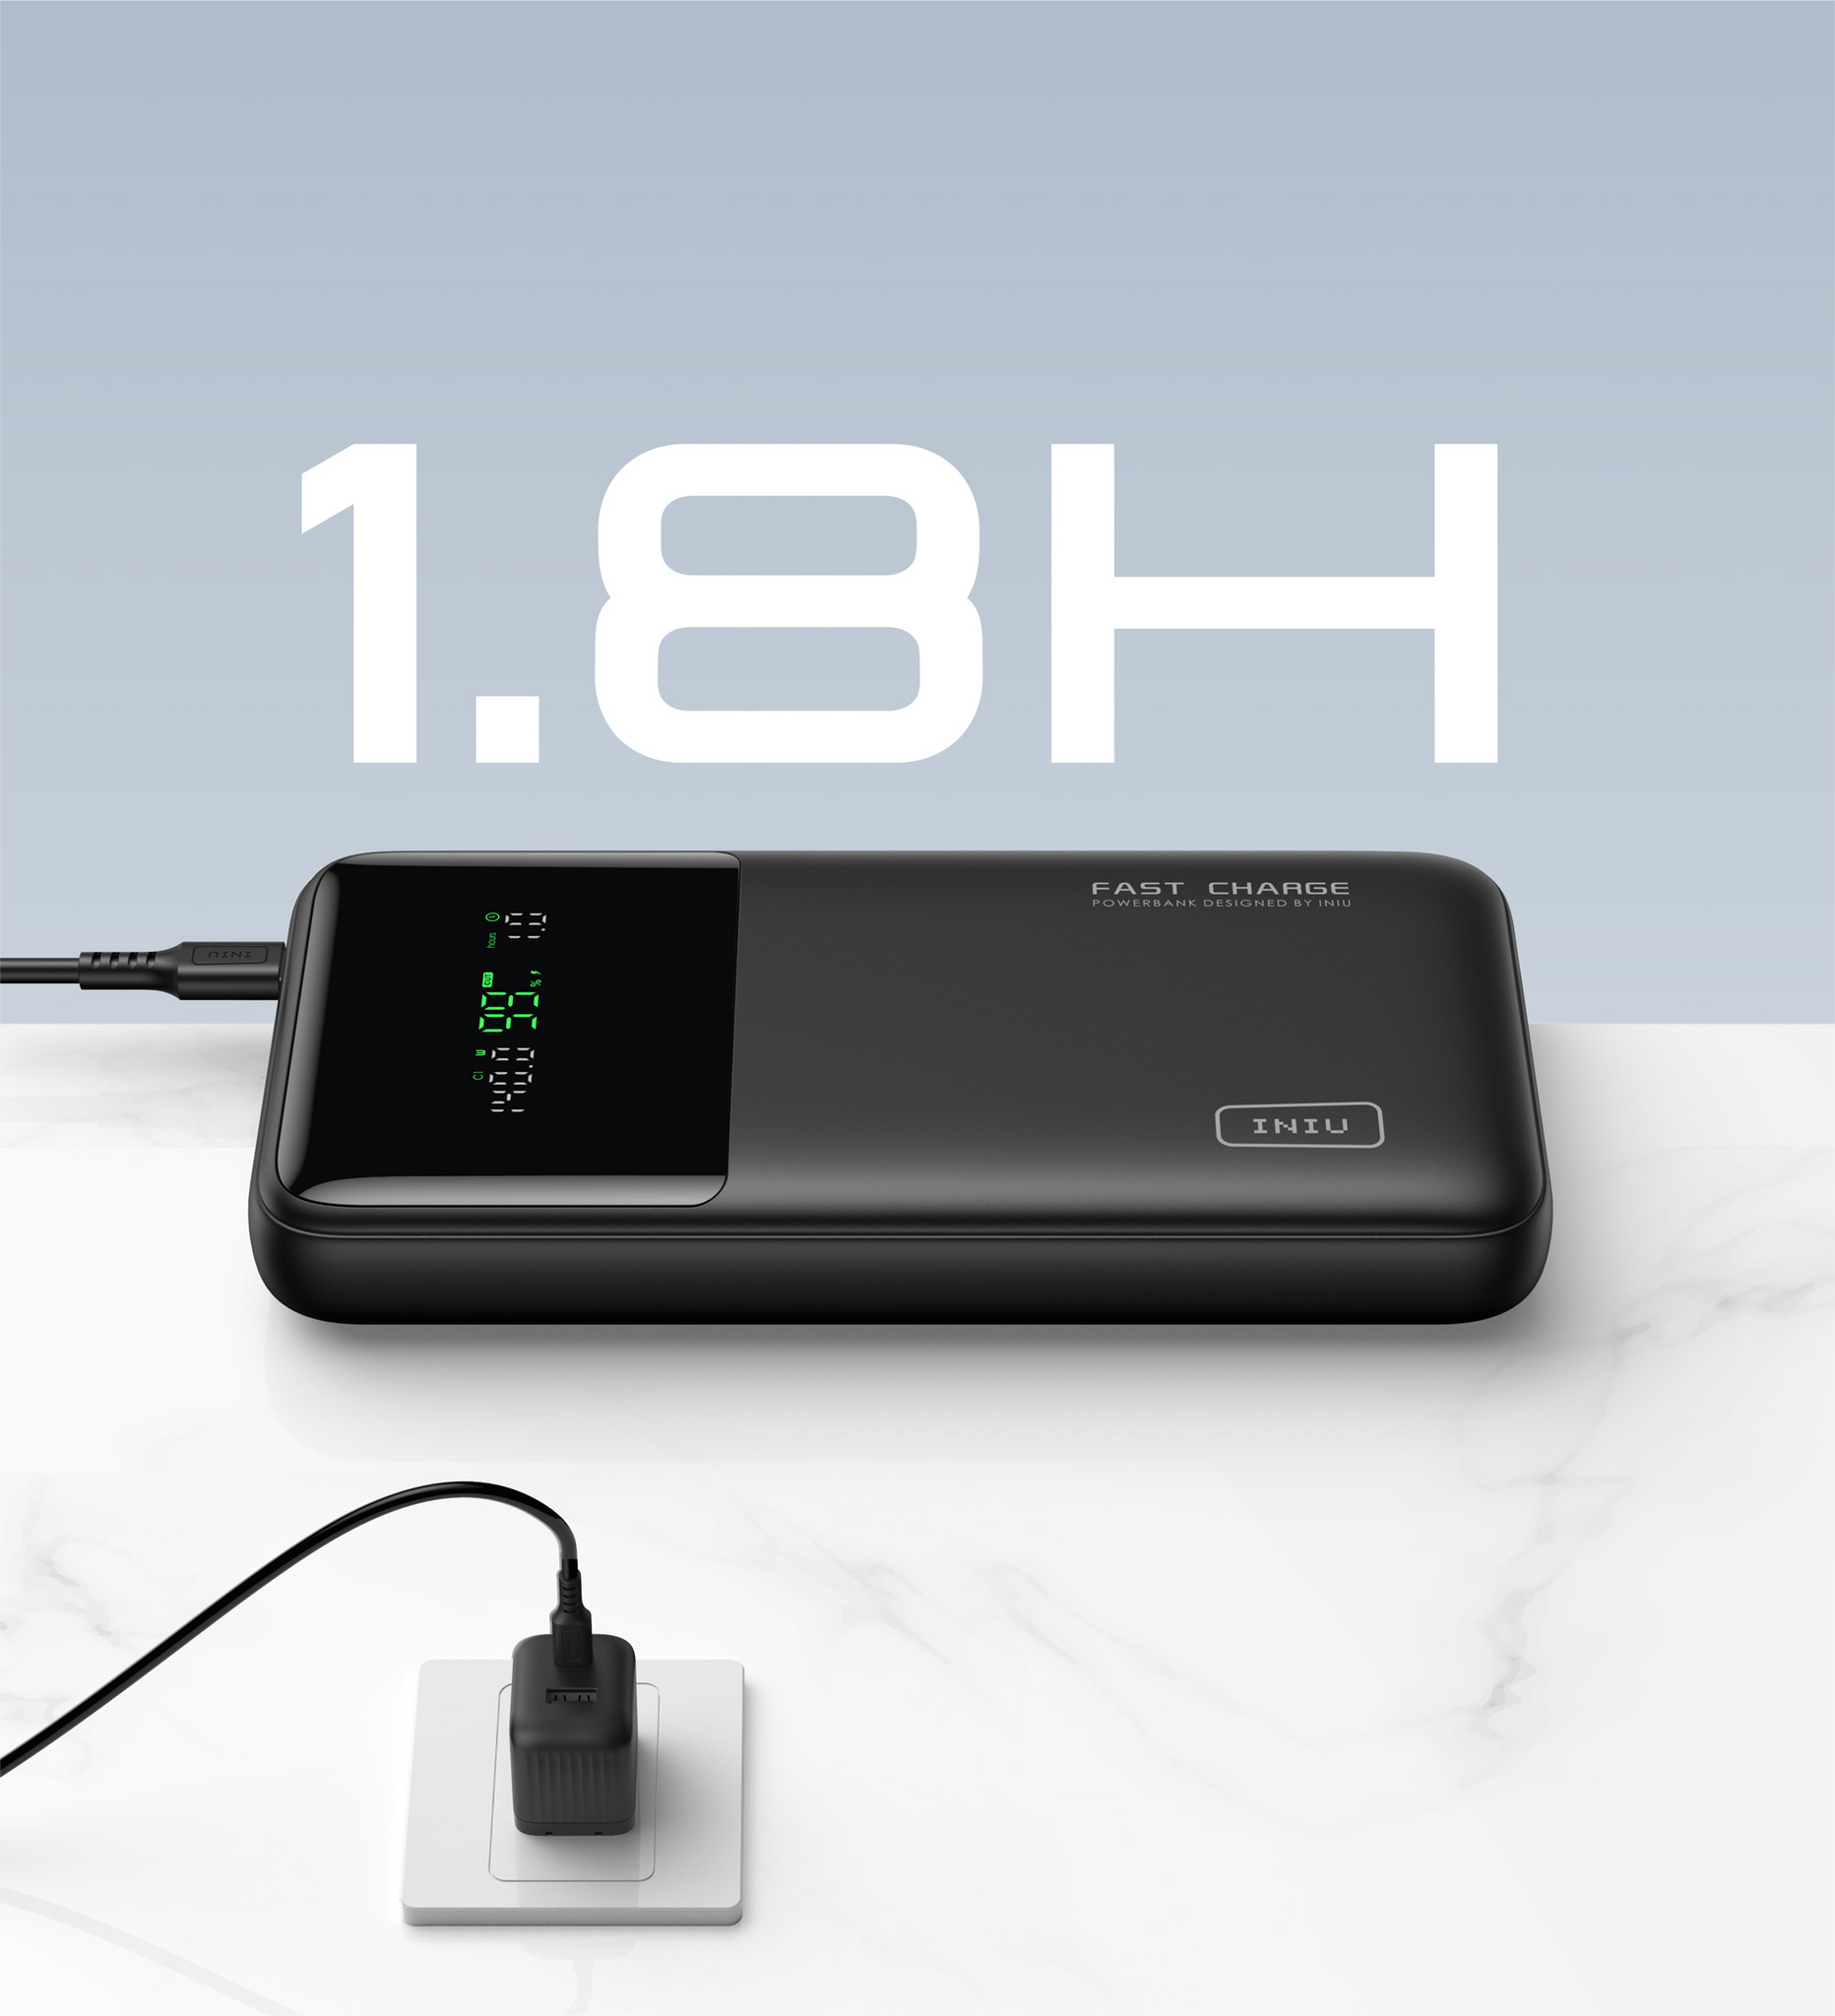  INIU 140W Power Bank, 27000mAh High Capacity Laptop Portable  Charger, USB C in&Out Tablet Powerbank, Smart Digital Display Phone Charge  Compatible with iPhone 15, Samsung, iPad, MacBook, Laptop etc. : Cell